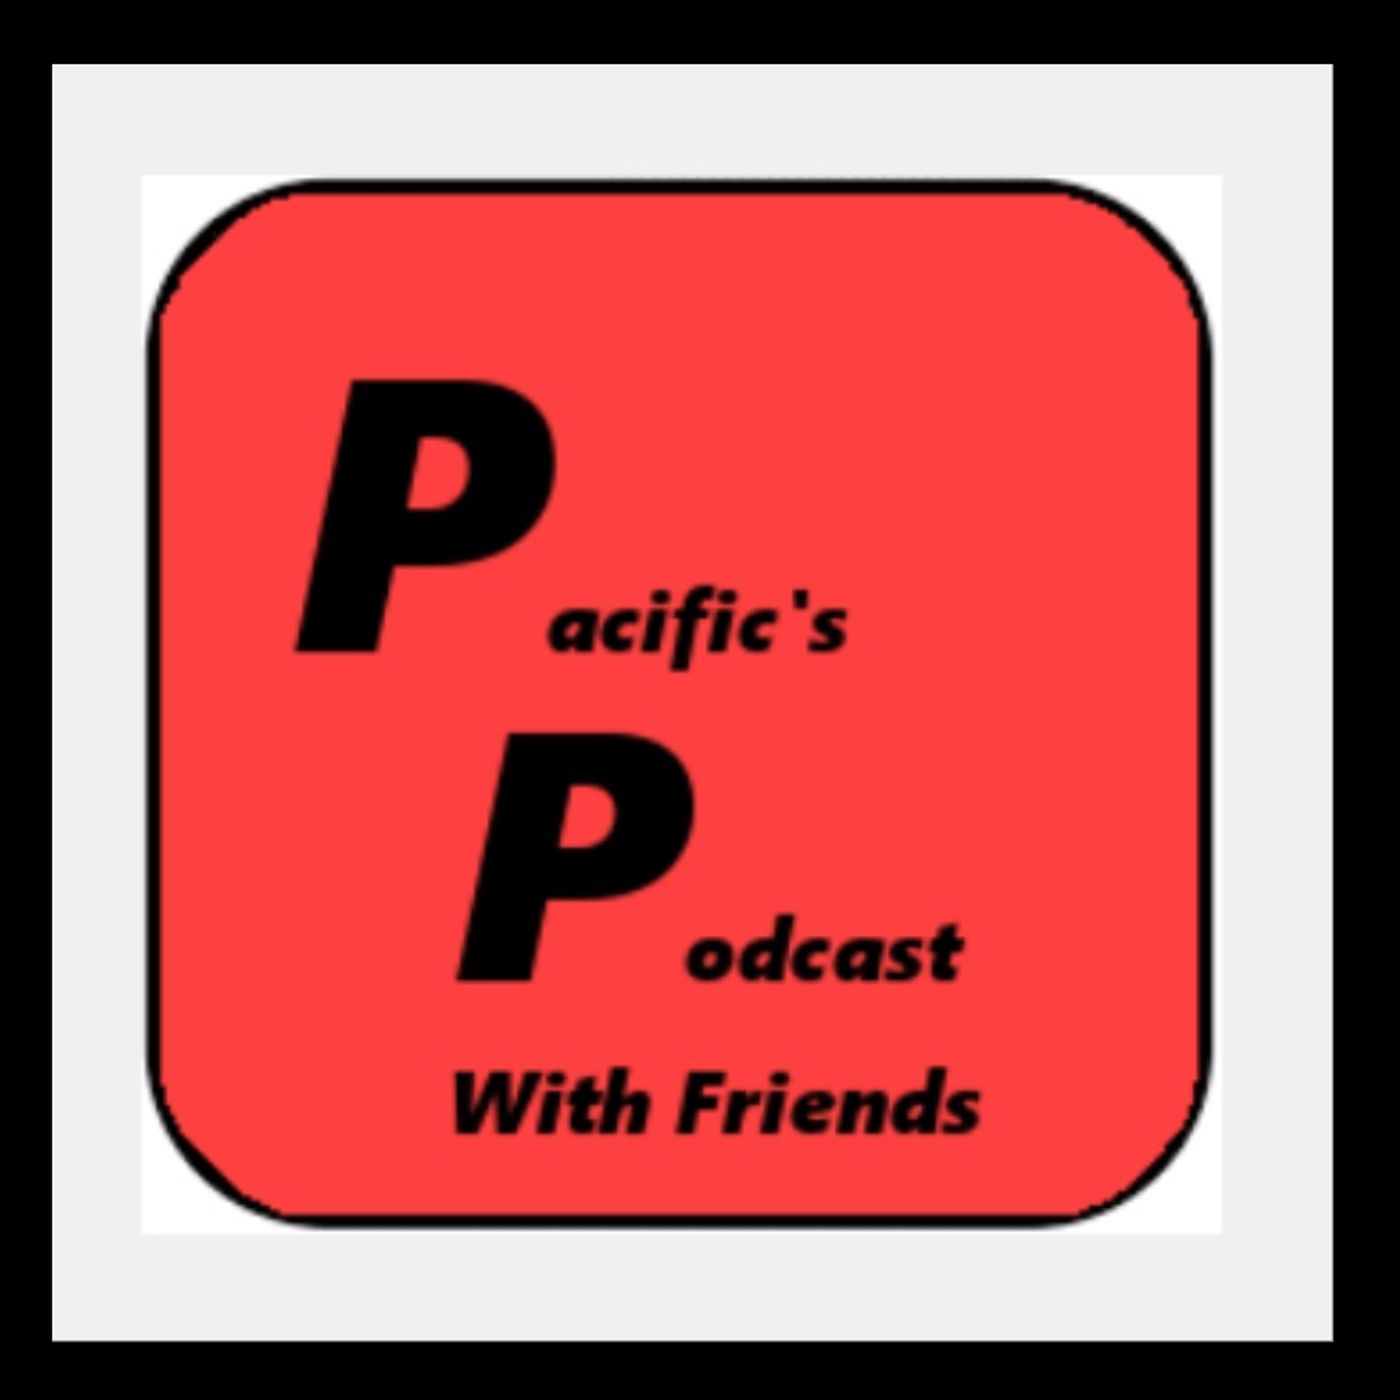 Pacific's Podcast With Friends